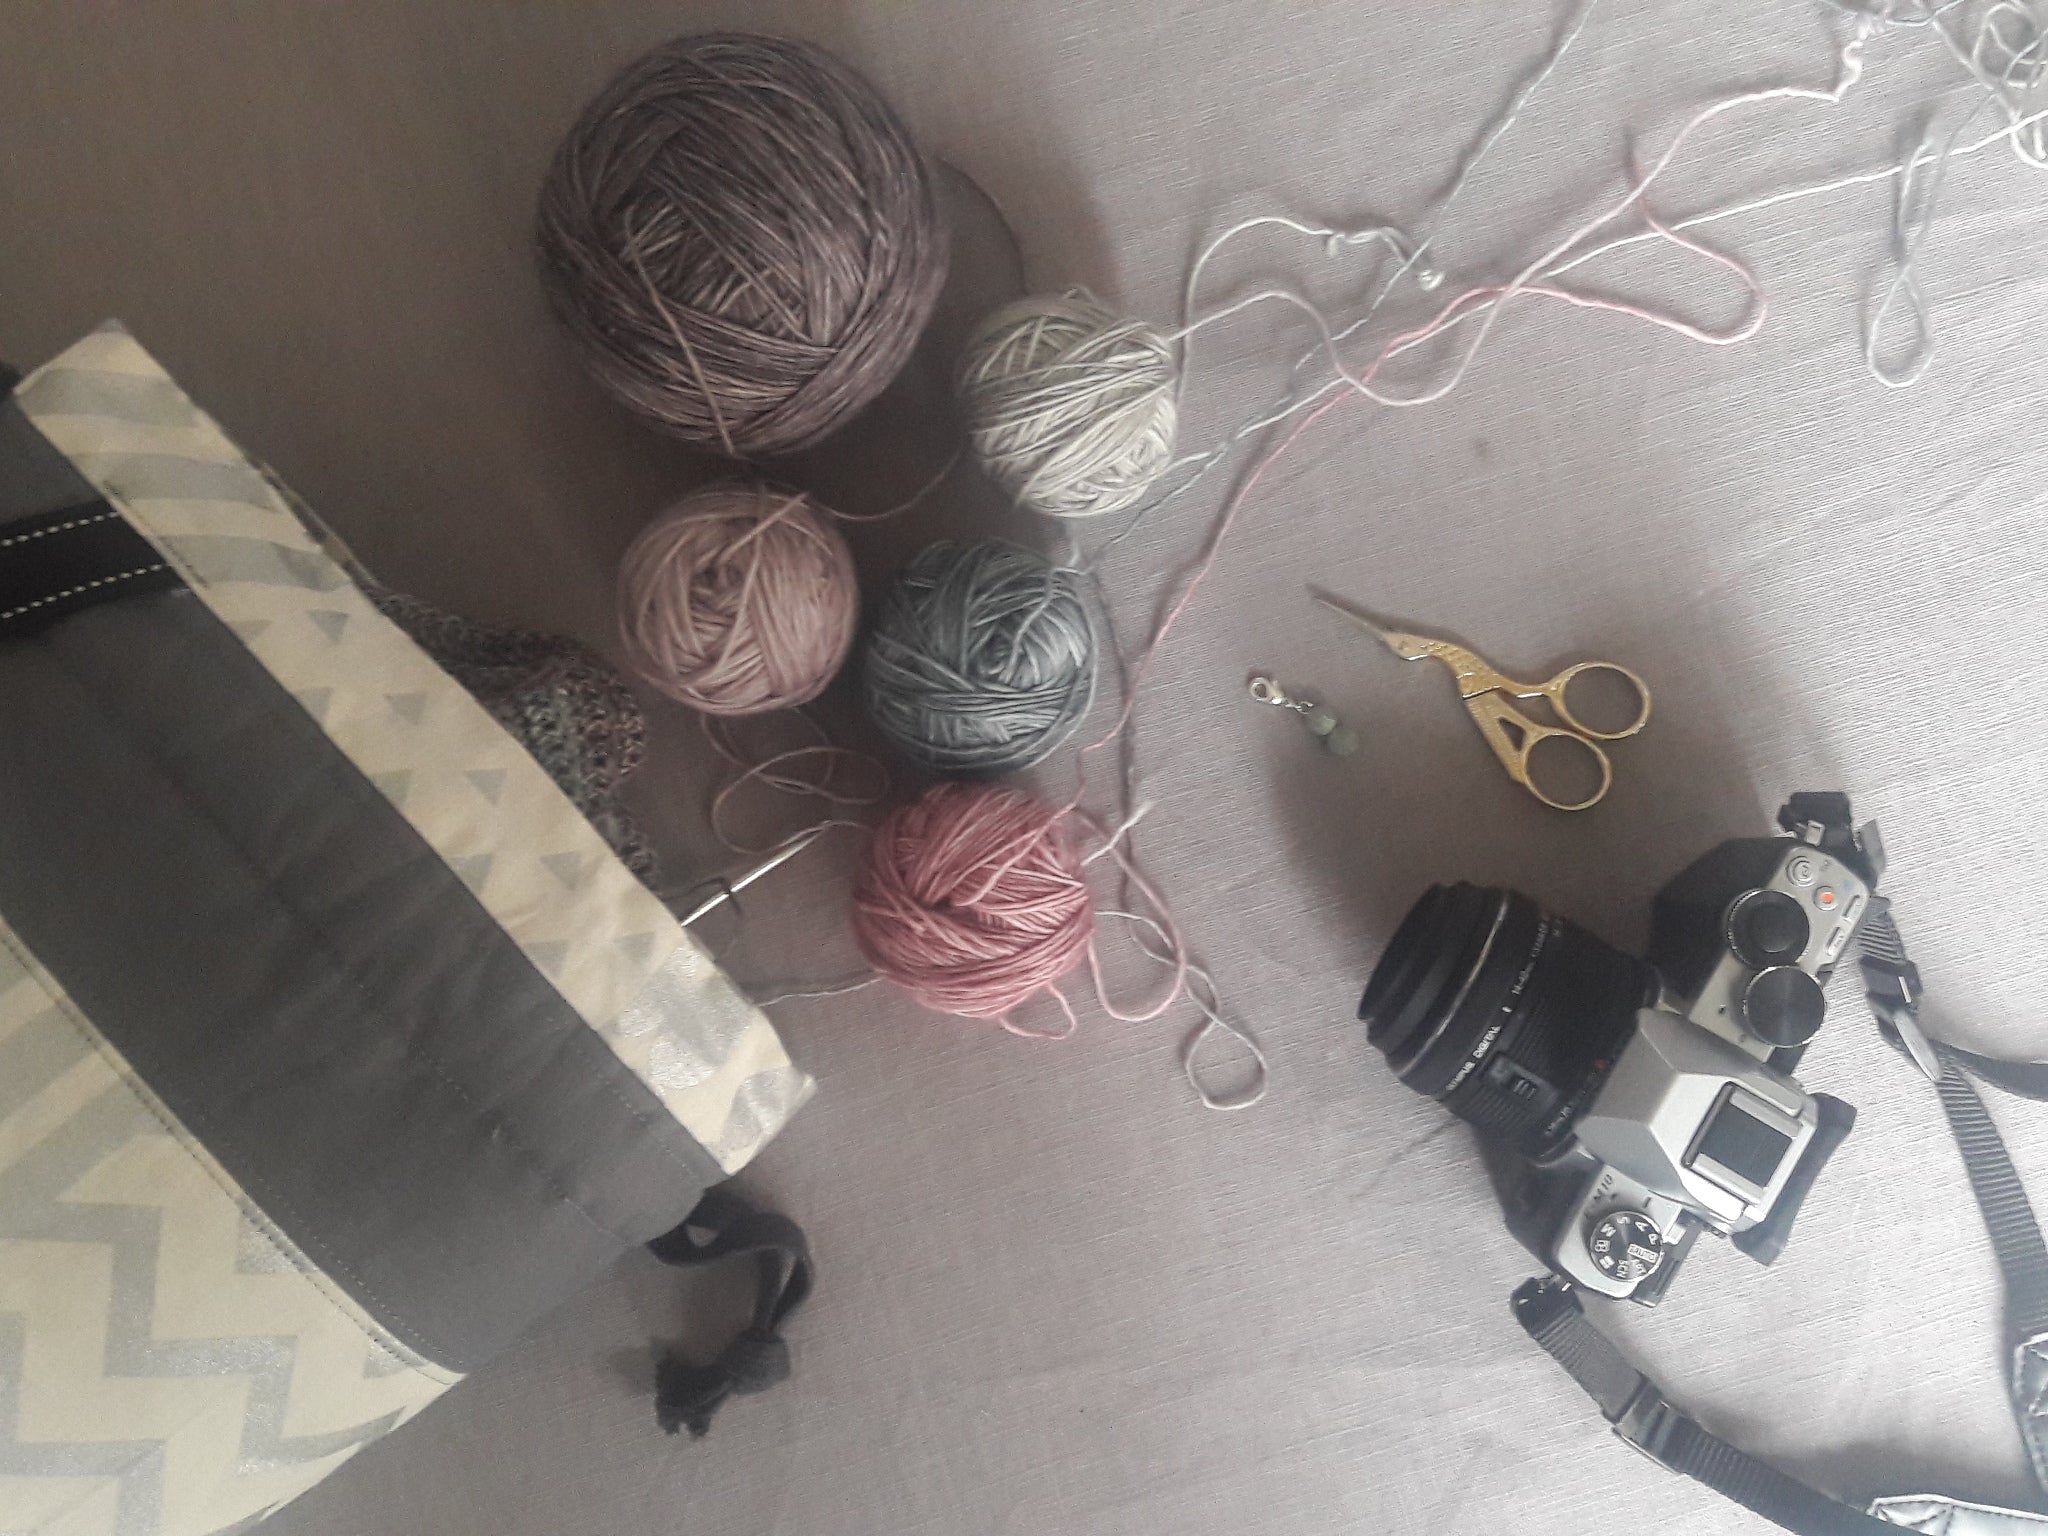 a bag of small balls of yarn spills over a grey cloth with scissors and a camera